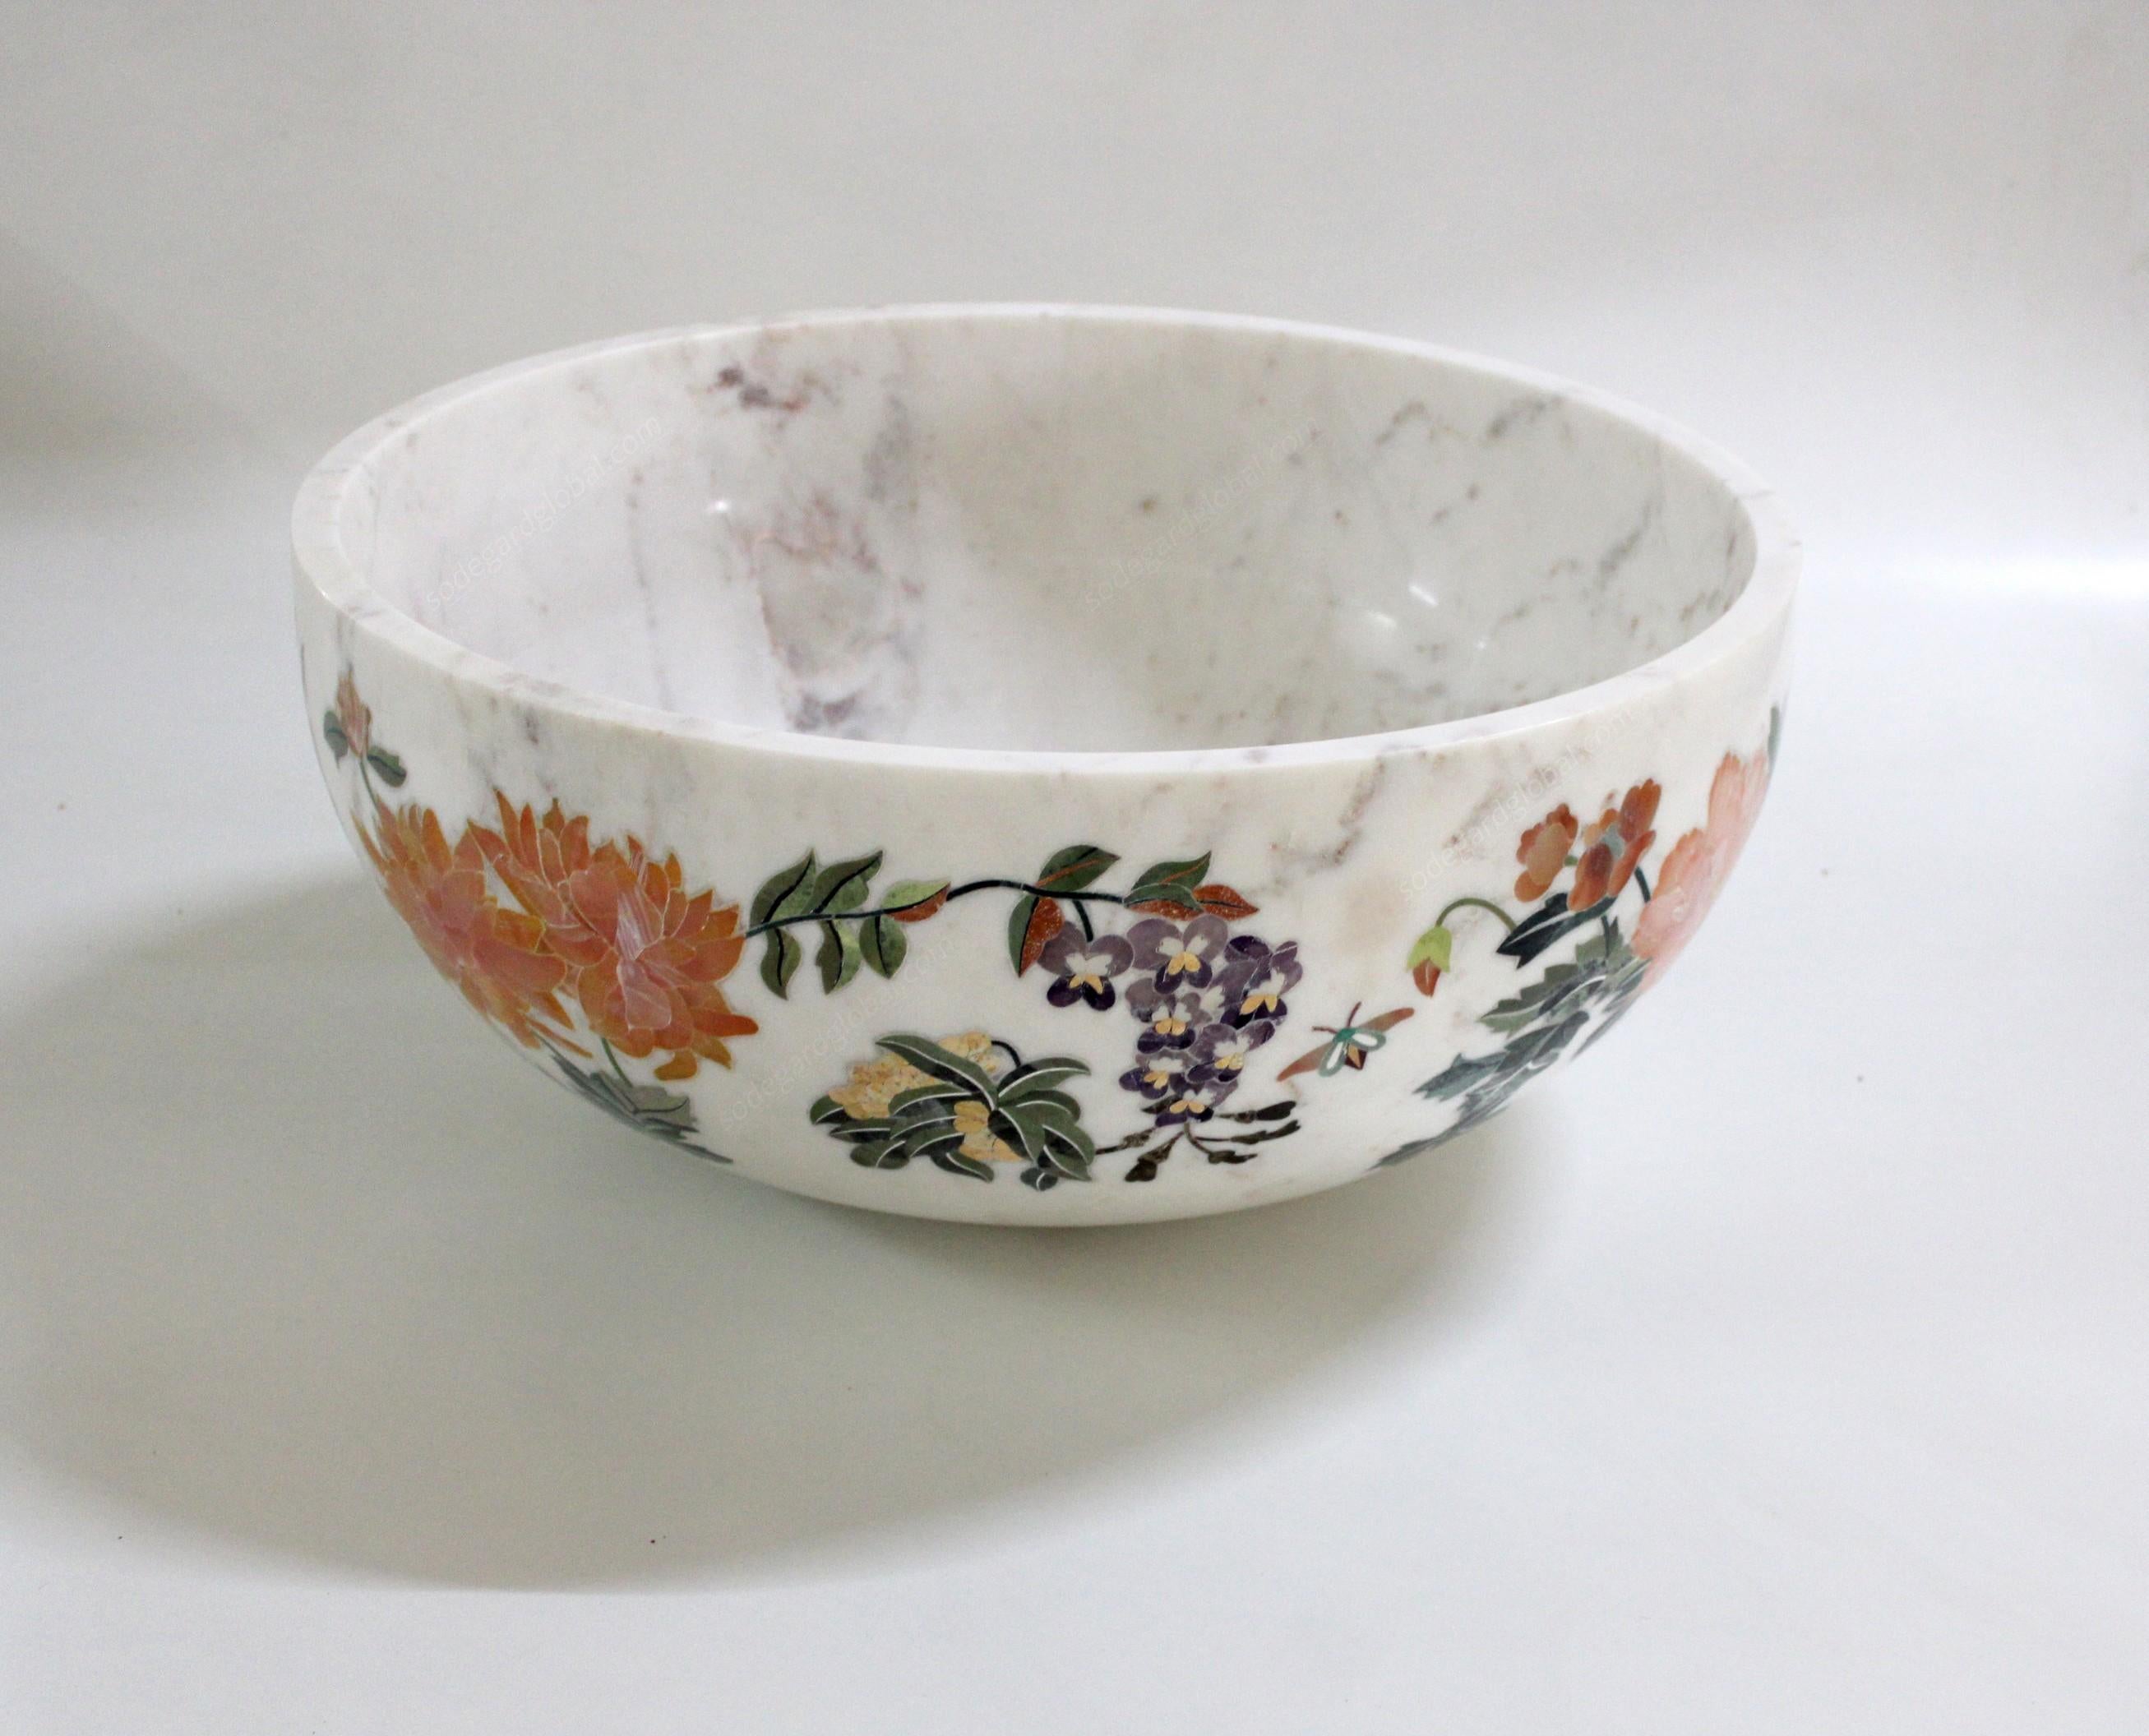 Handmade Ornamenti Bowl Inlay in White Marble by Stephanie Odegard For Sale 2